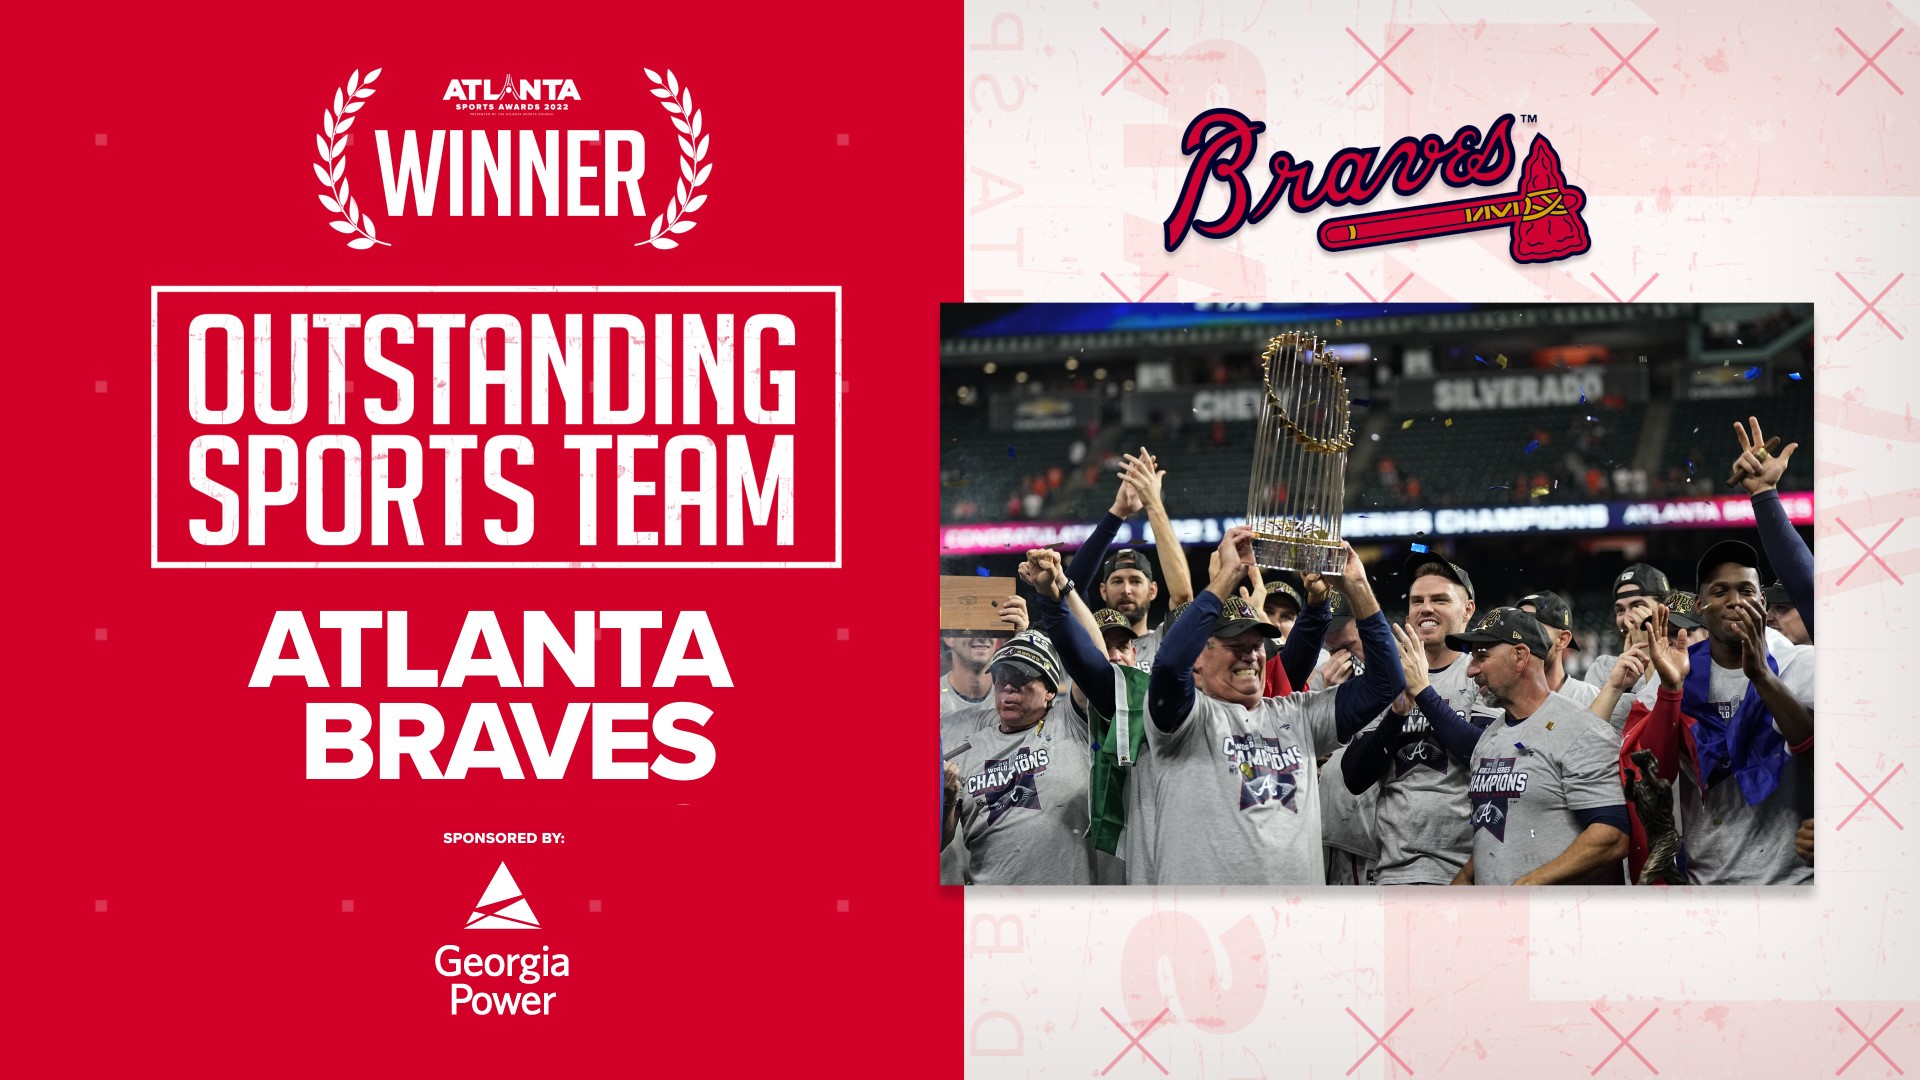 The Braves won their fourth consecutive division title, then moved on to claim the National League Pennant and of course they didn’t stop there.